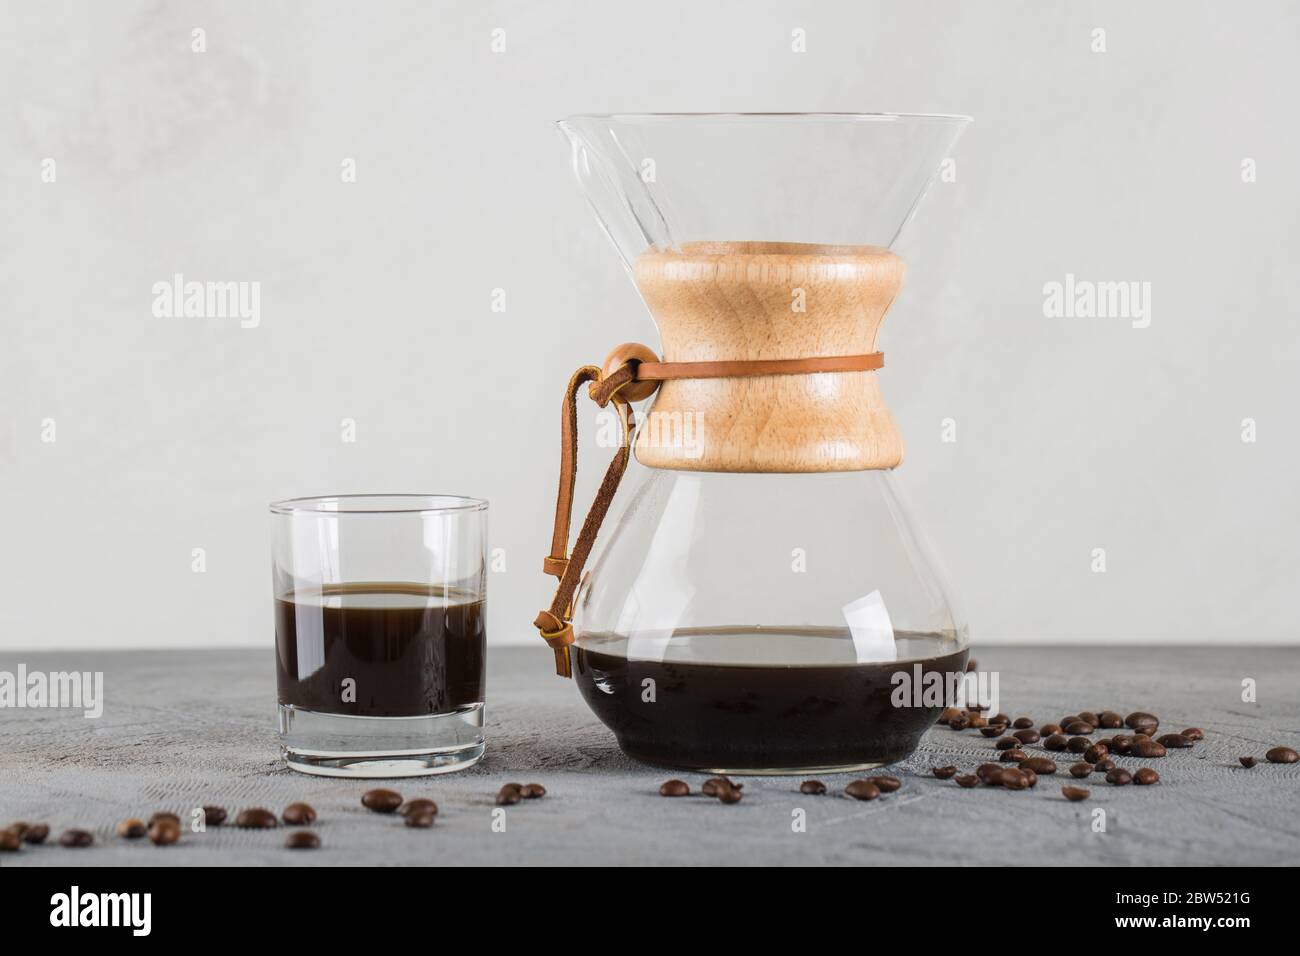 A device for brewing coffee using a filter. Close up on the table. Stock Photo